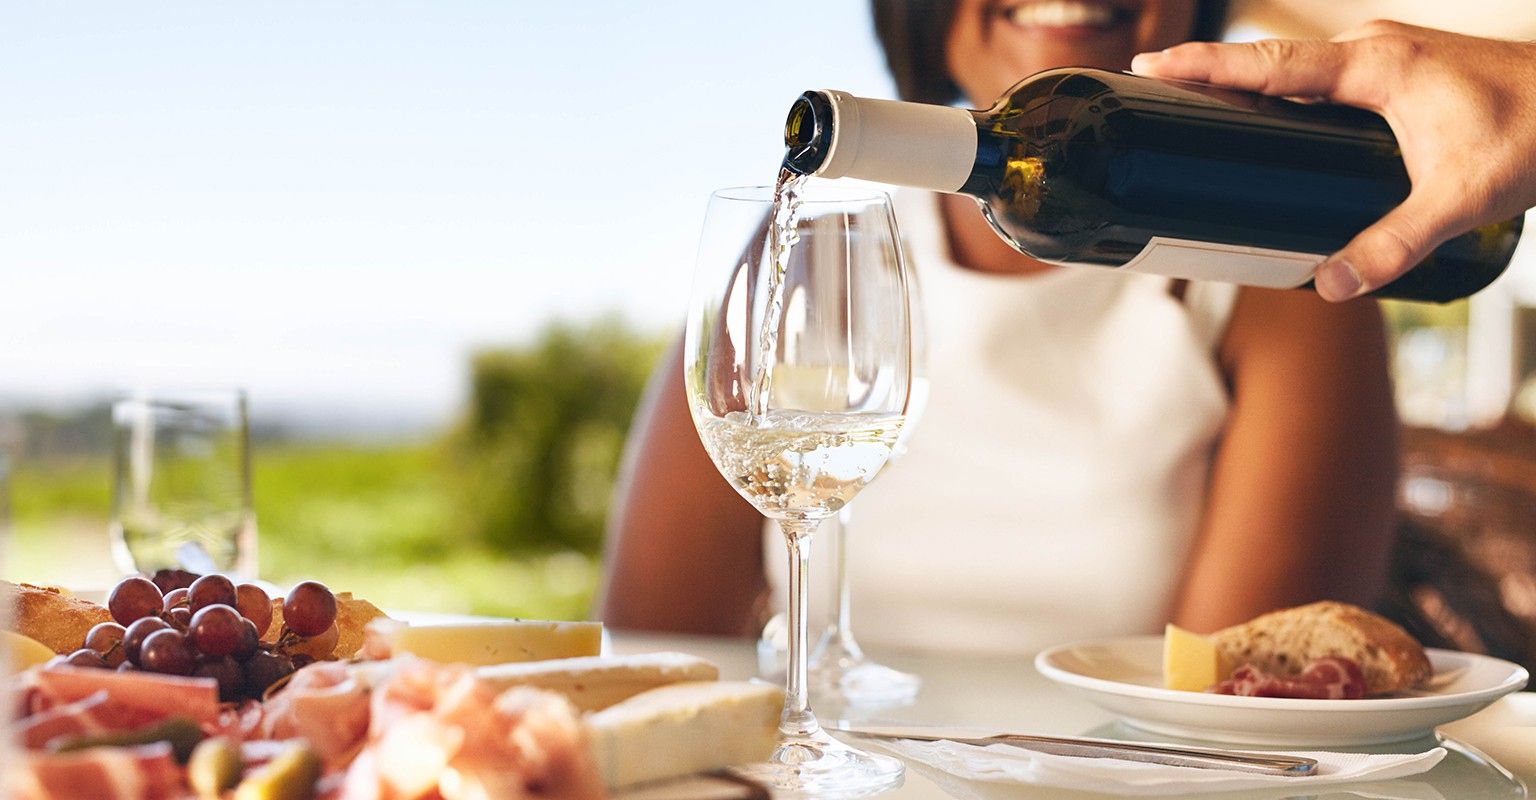 The 10 Best Wine Tasting Lessons Near Me (with Free Estimates)